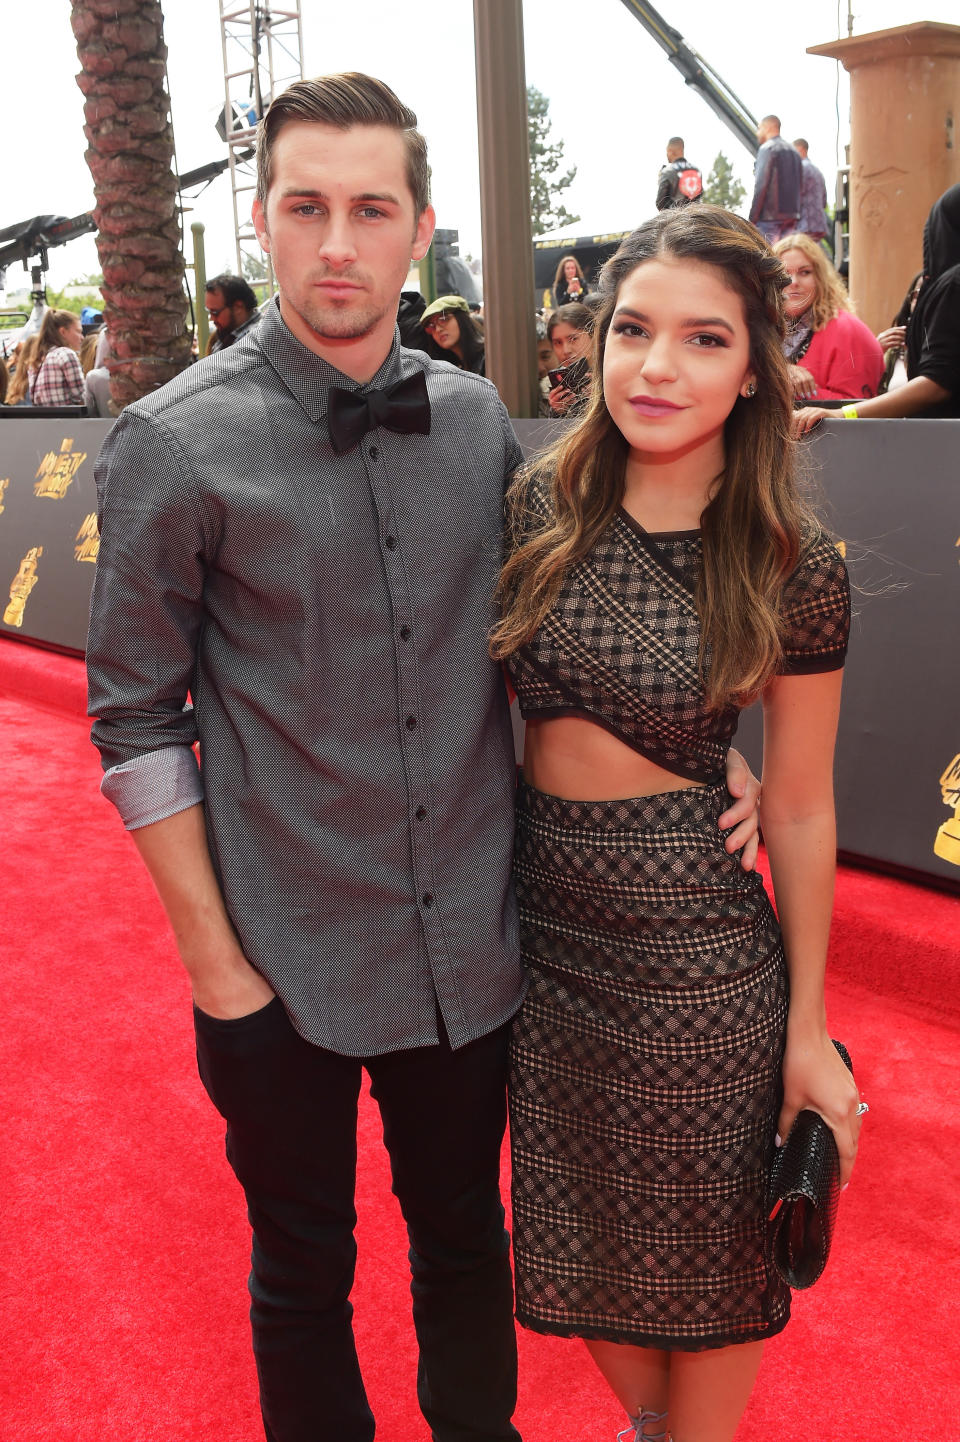 Actors Cody Johns (L) and Alexys Gabrielle Johns attend the 2017 MTV Movie And TV Awards at The Shrine Auditorium on May 7, 2017 in Los Angeles, California.